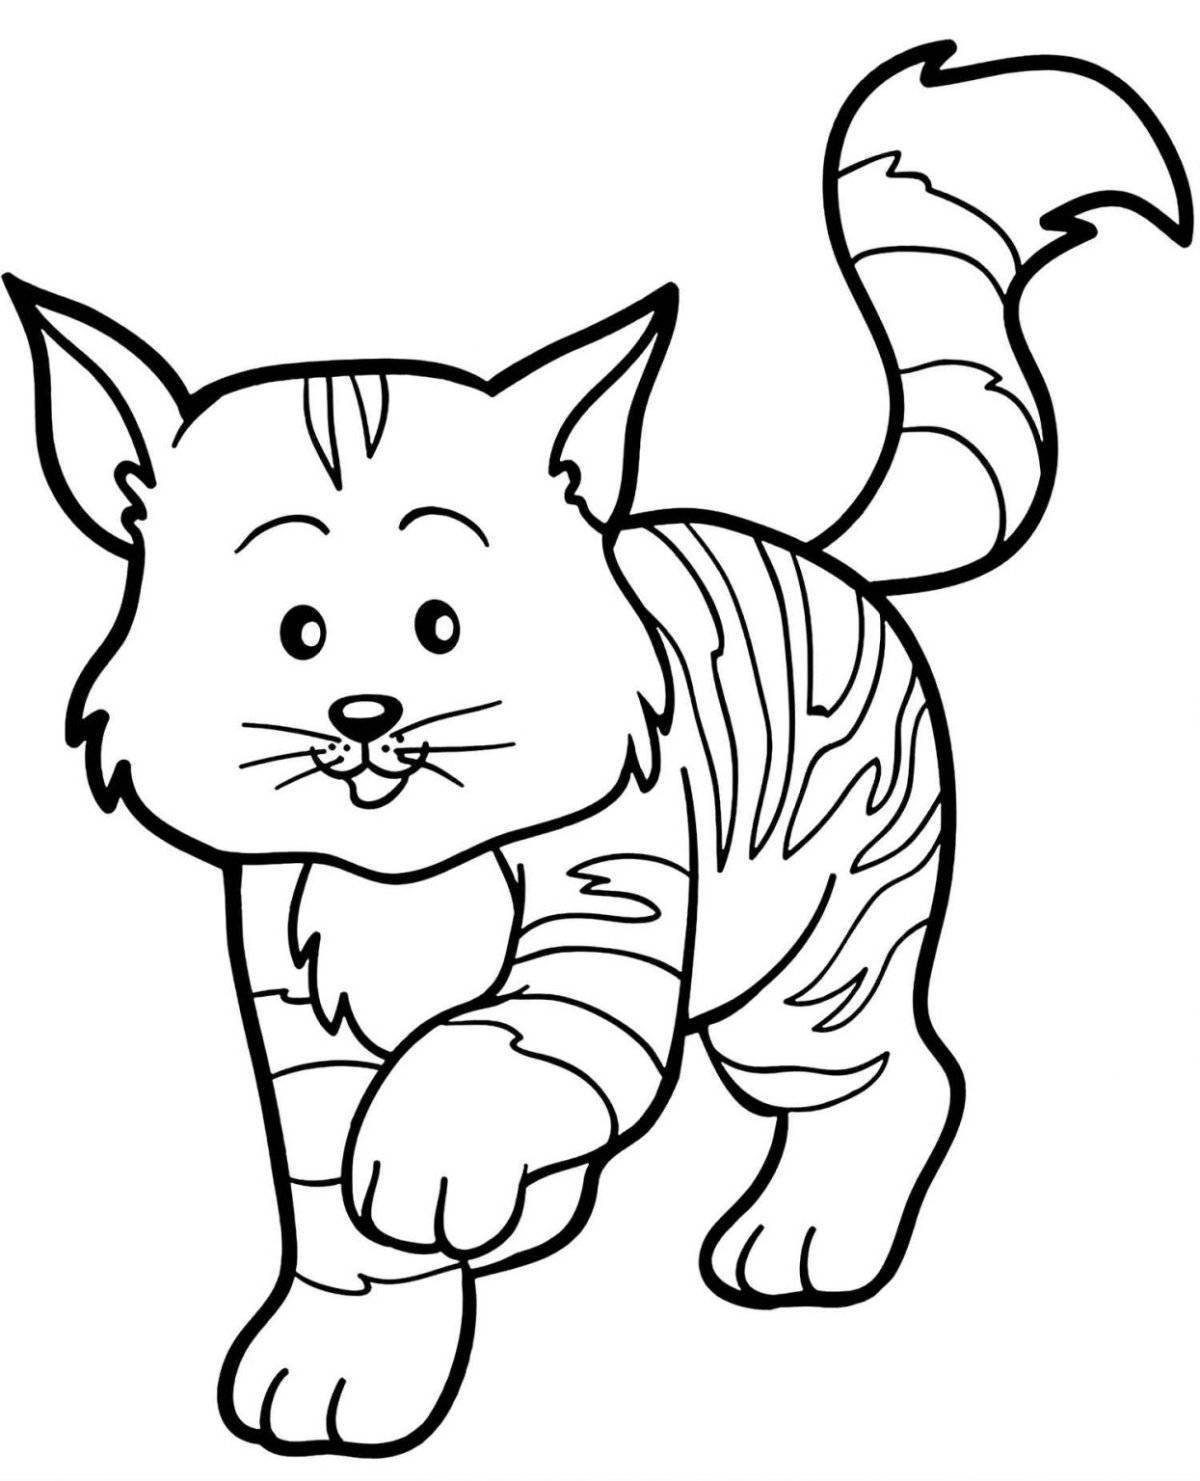 Coloring page relaxed tabby cat